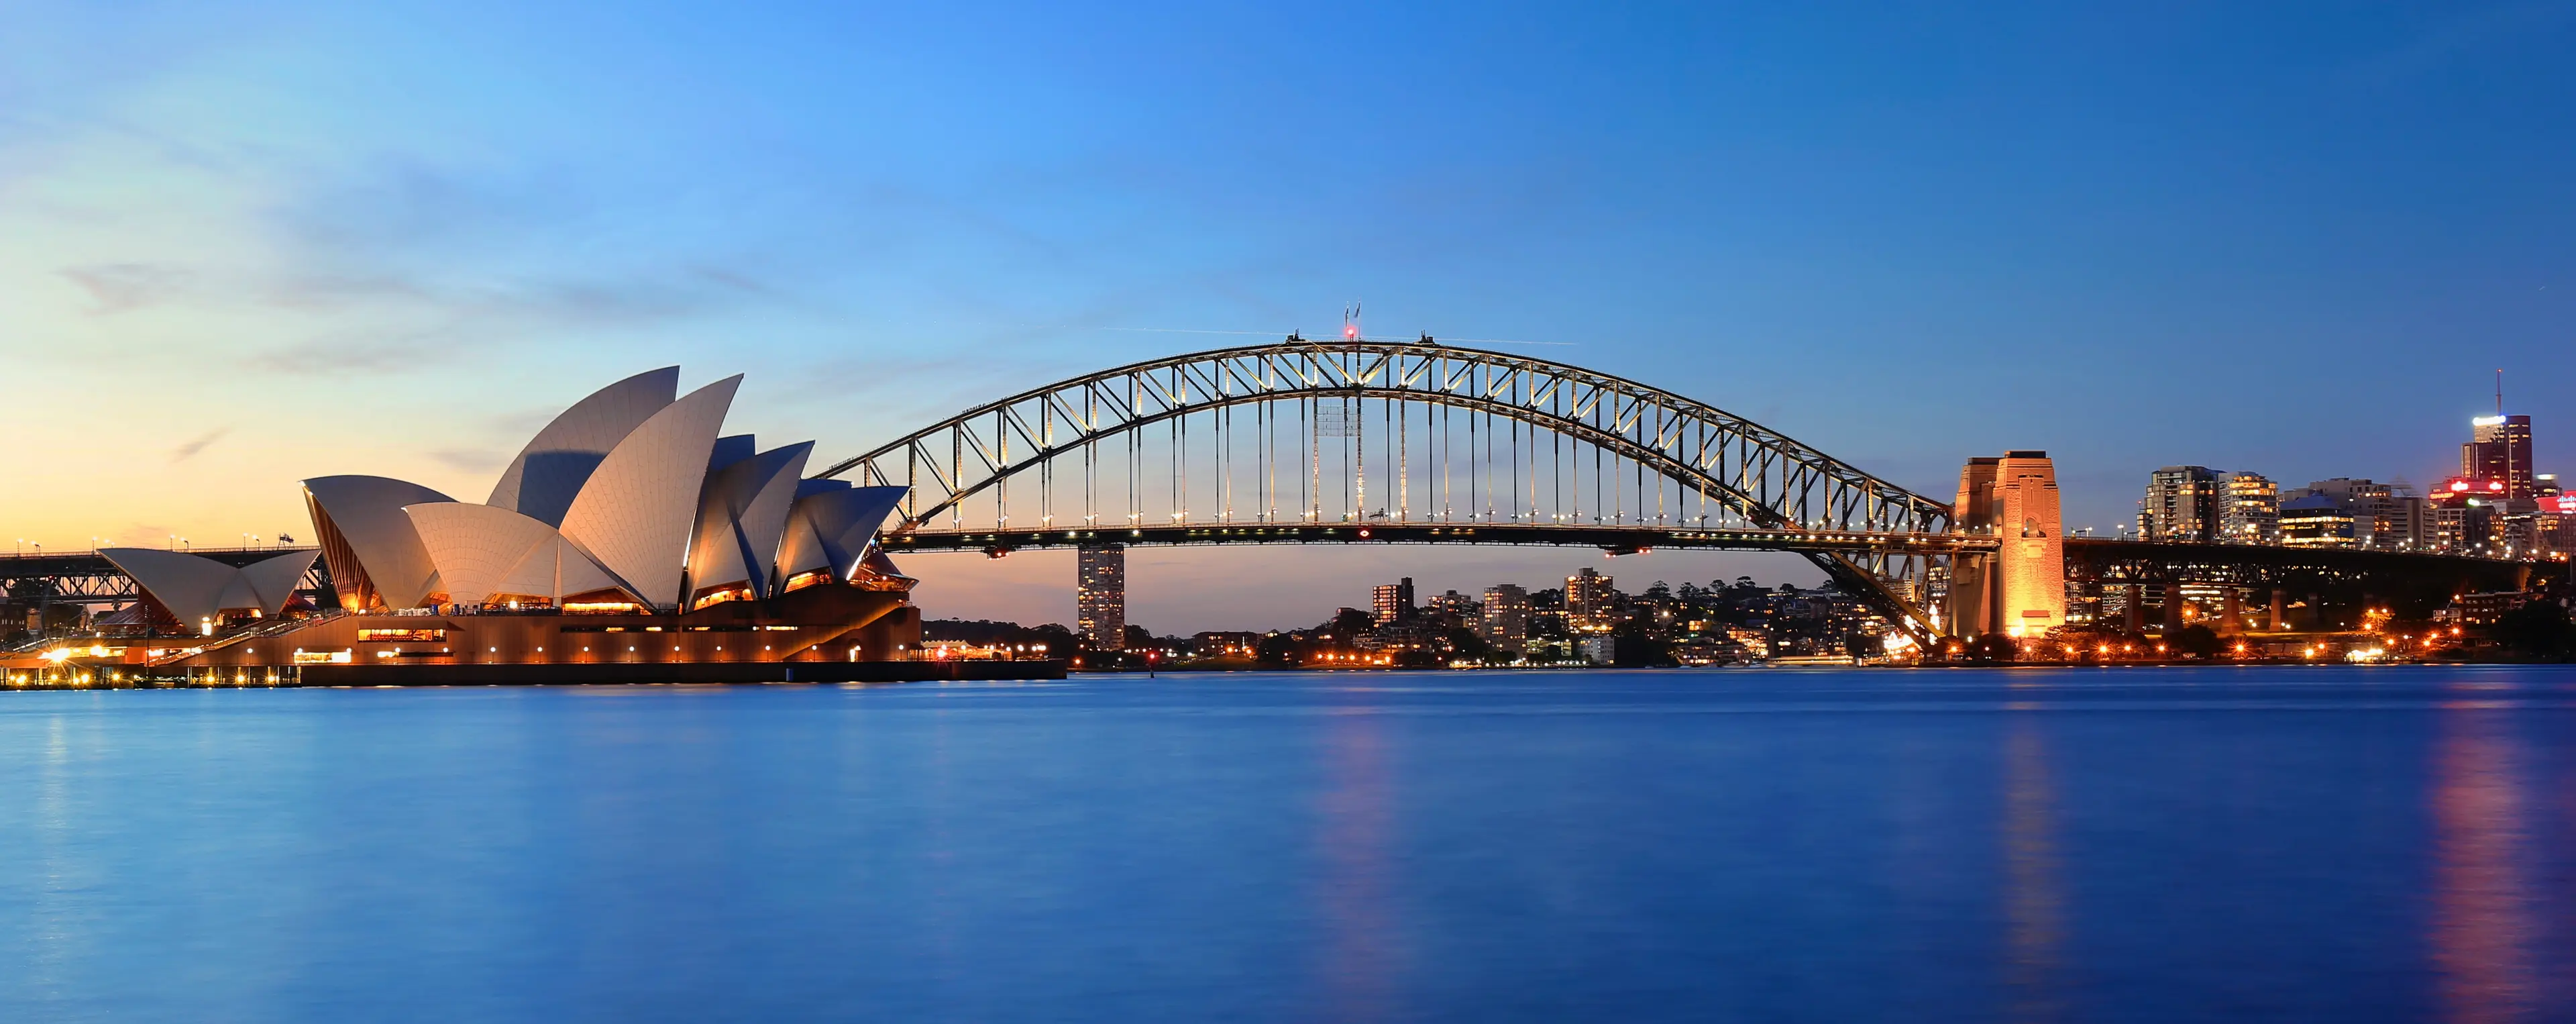 1-Day Sydney Adventure Itinerary for Thrill-Seeking Couples